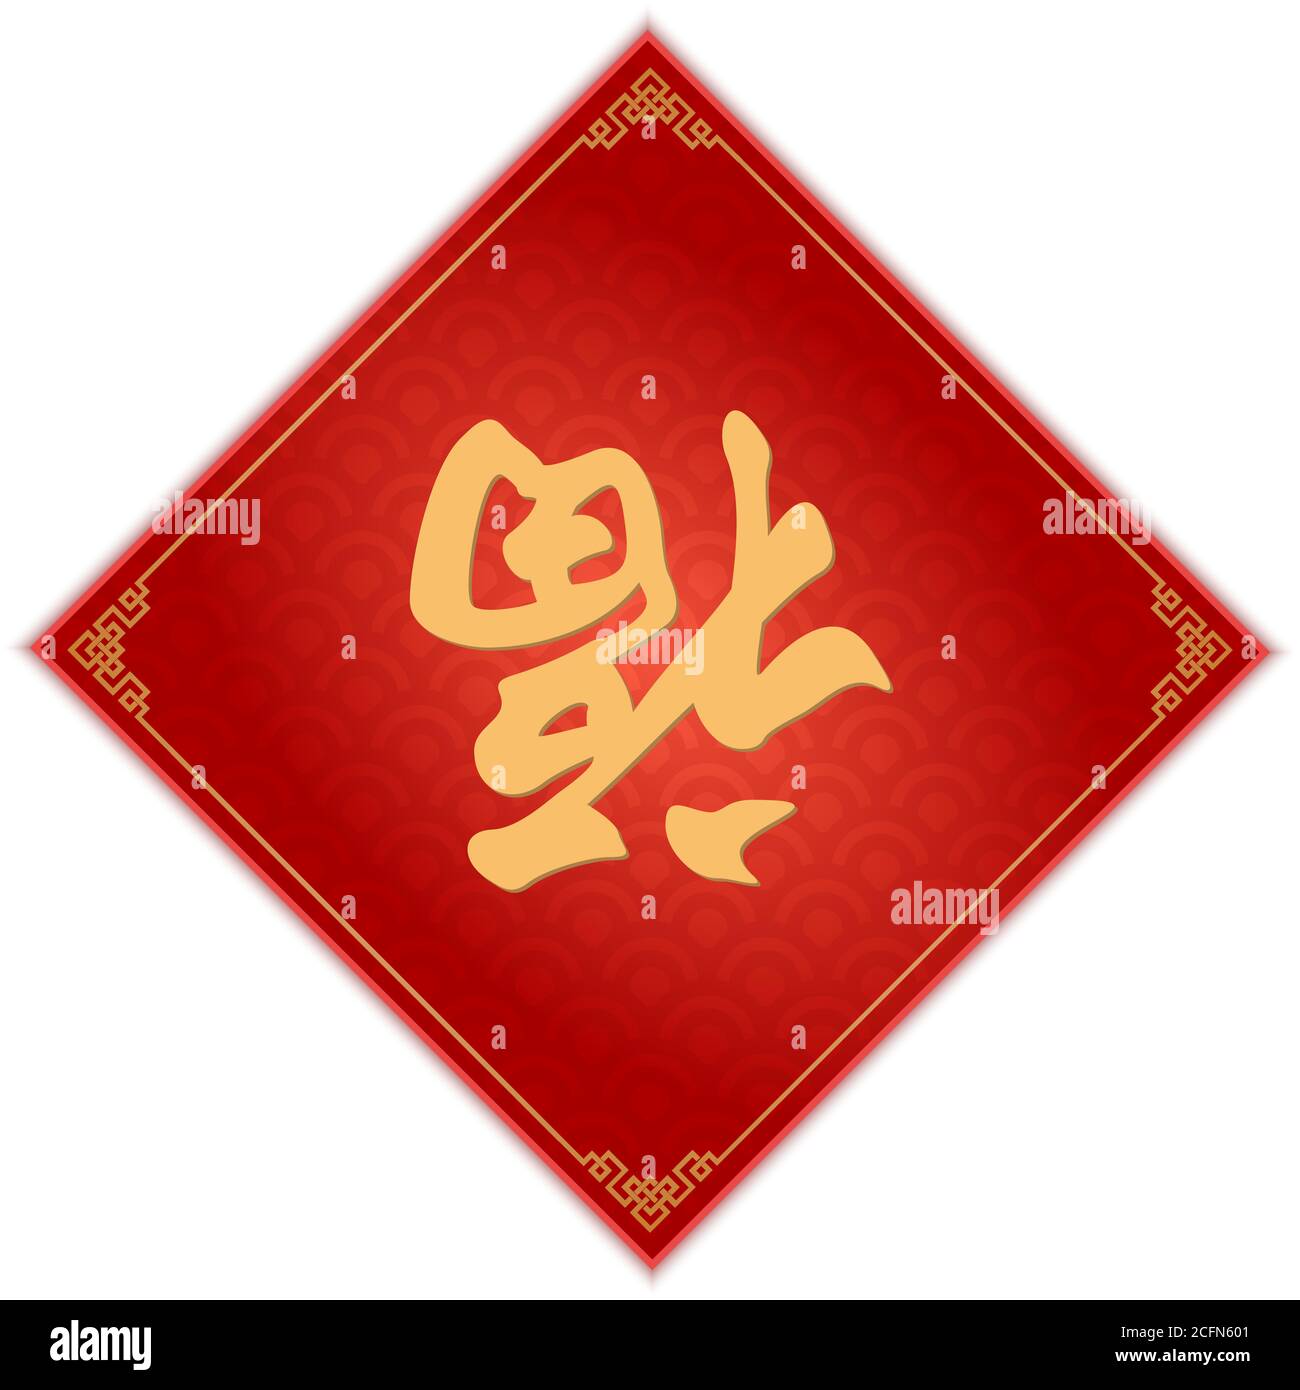 Traditional Chinese Background With The Chinese Word 'Fortune' Stock Vector